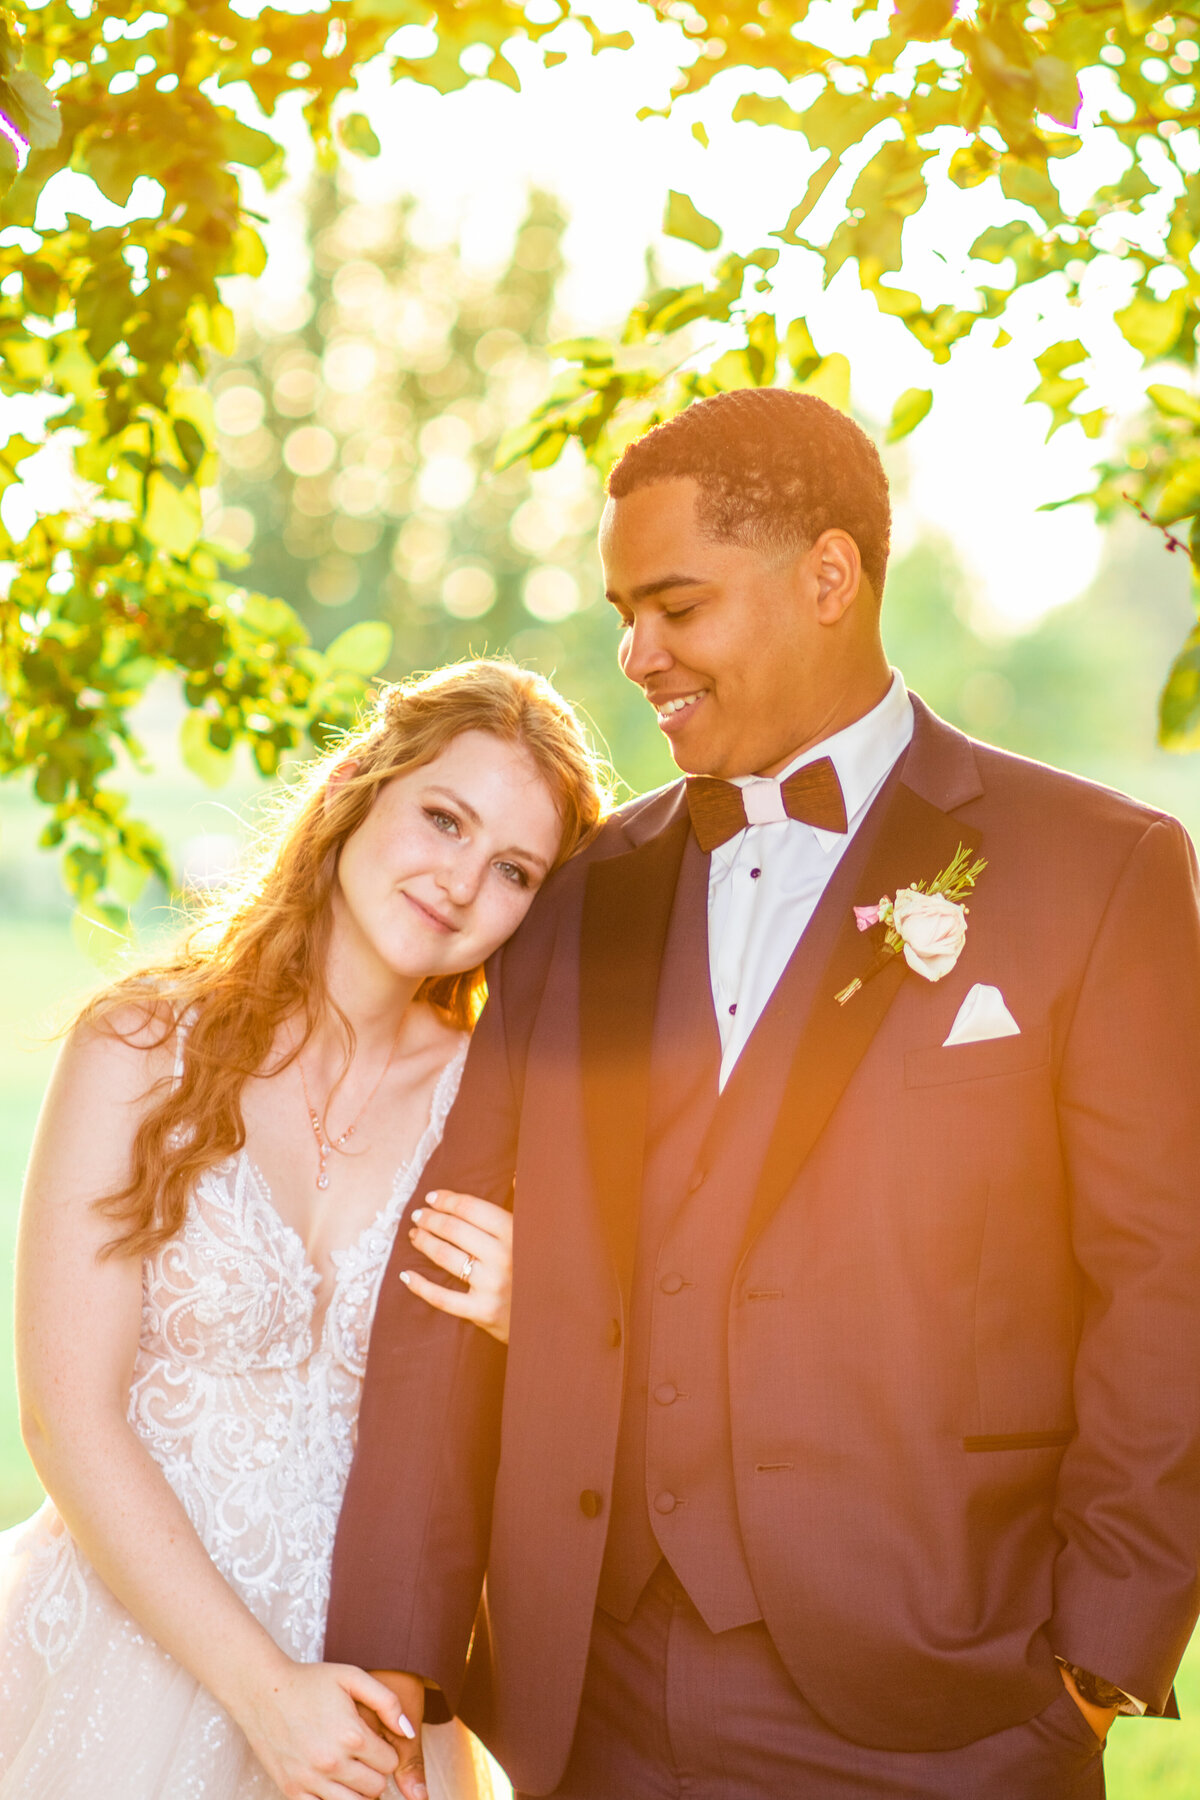 Warm, bright, and natural wedding photos. Devin Ramon Photography.